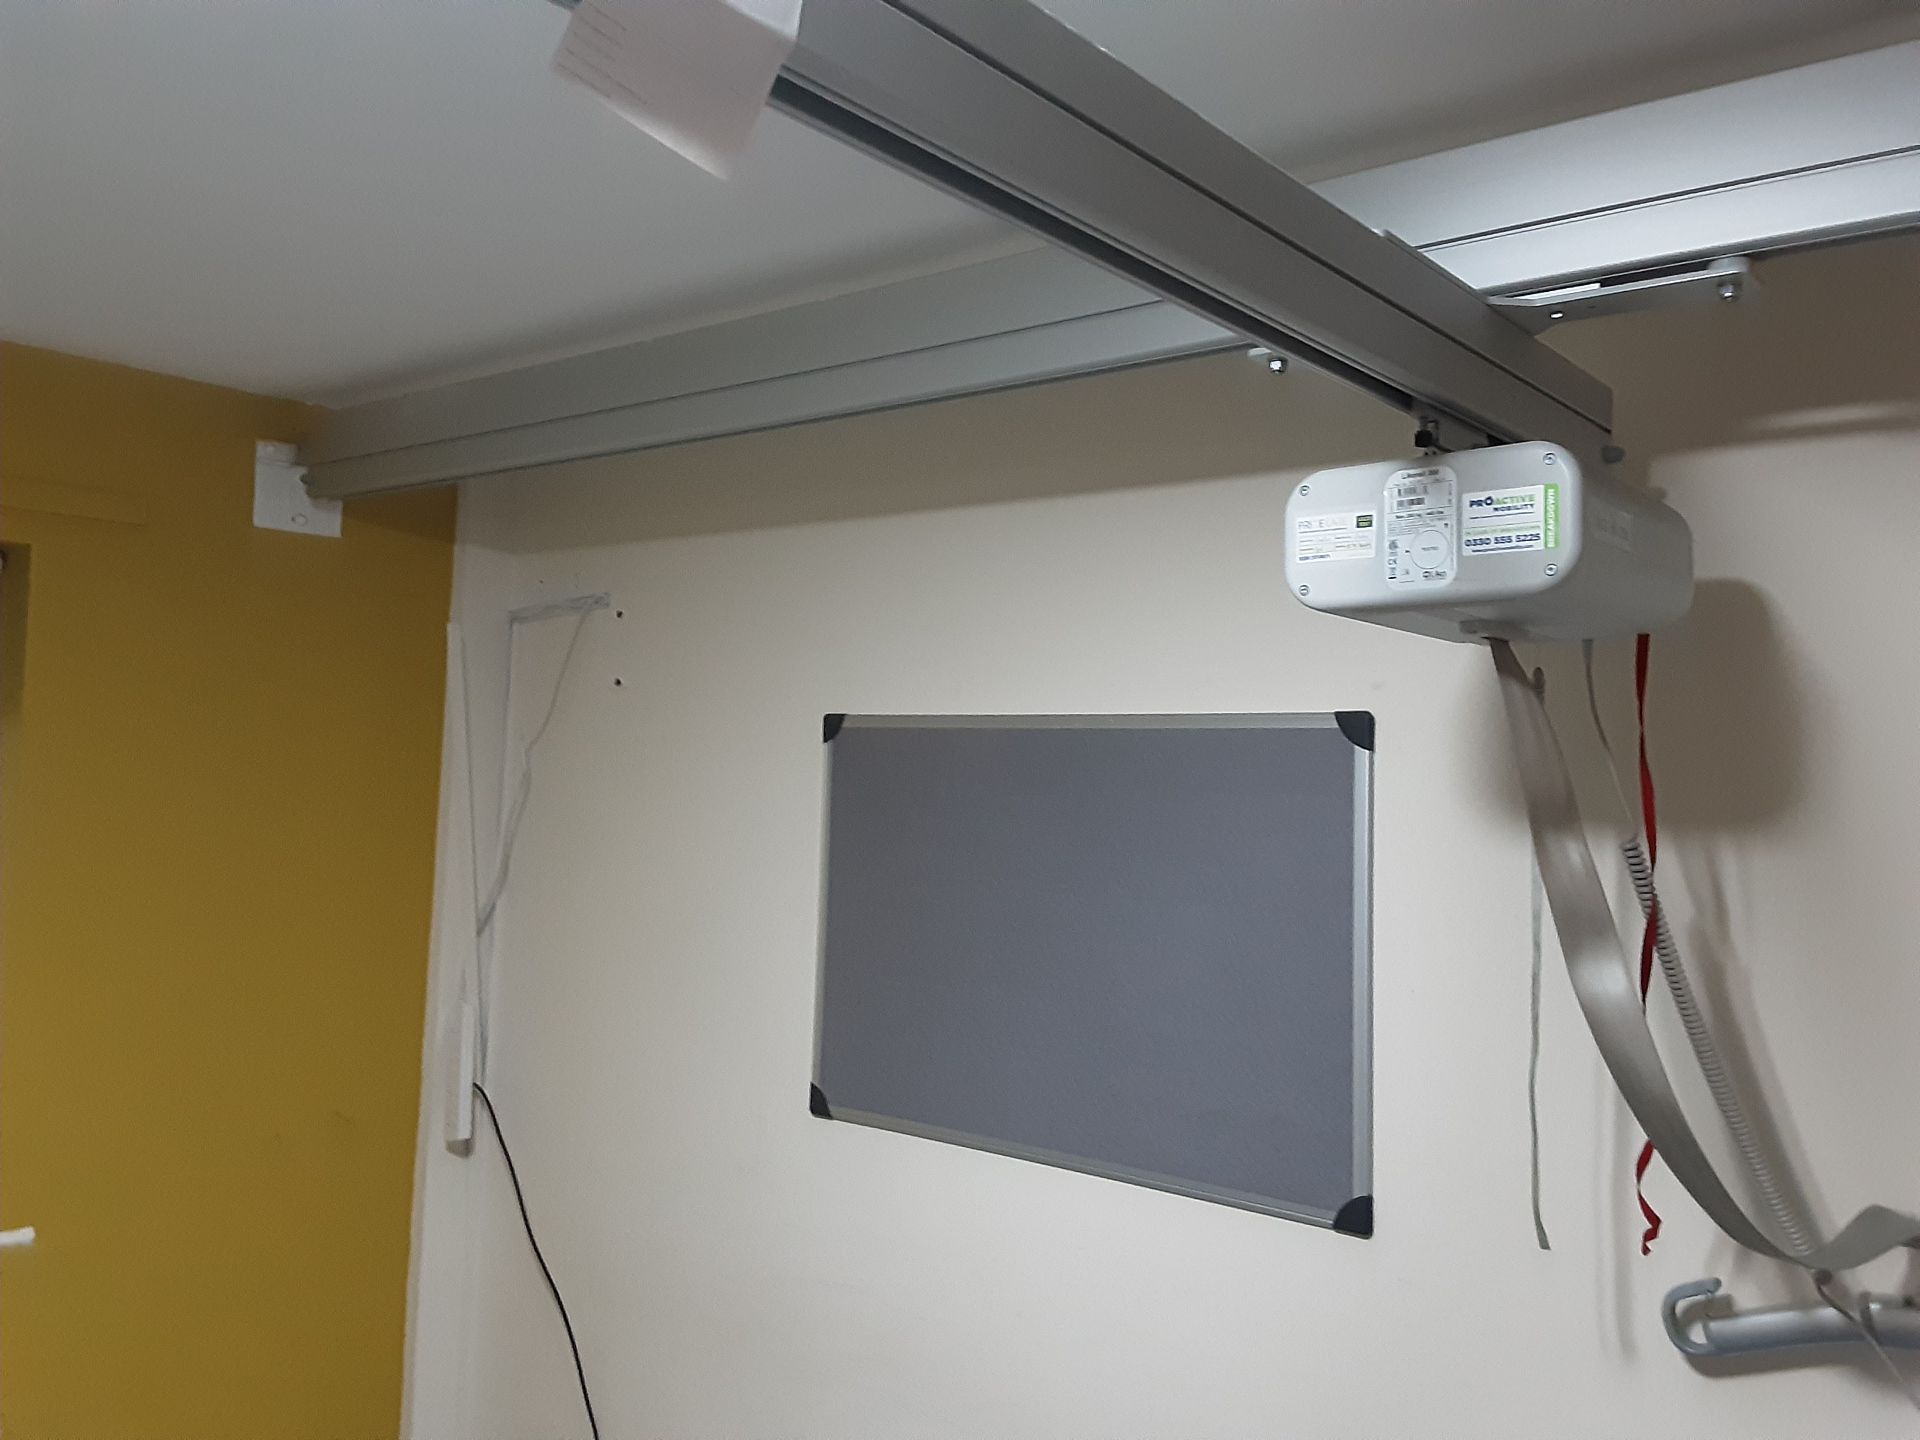 Likorall 200kg Patient Lift with KwikTrak Ceiling Rail System Serial No: 8707849 - Image 10 of 10